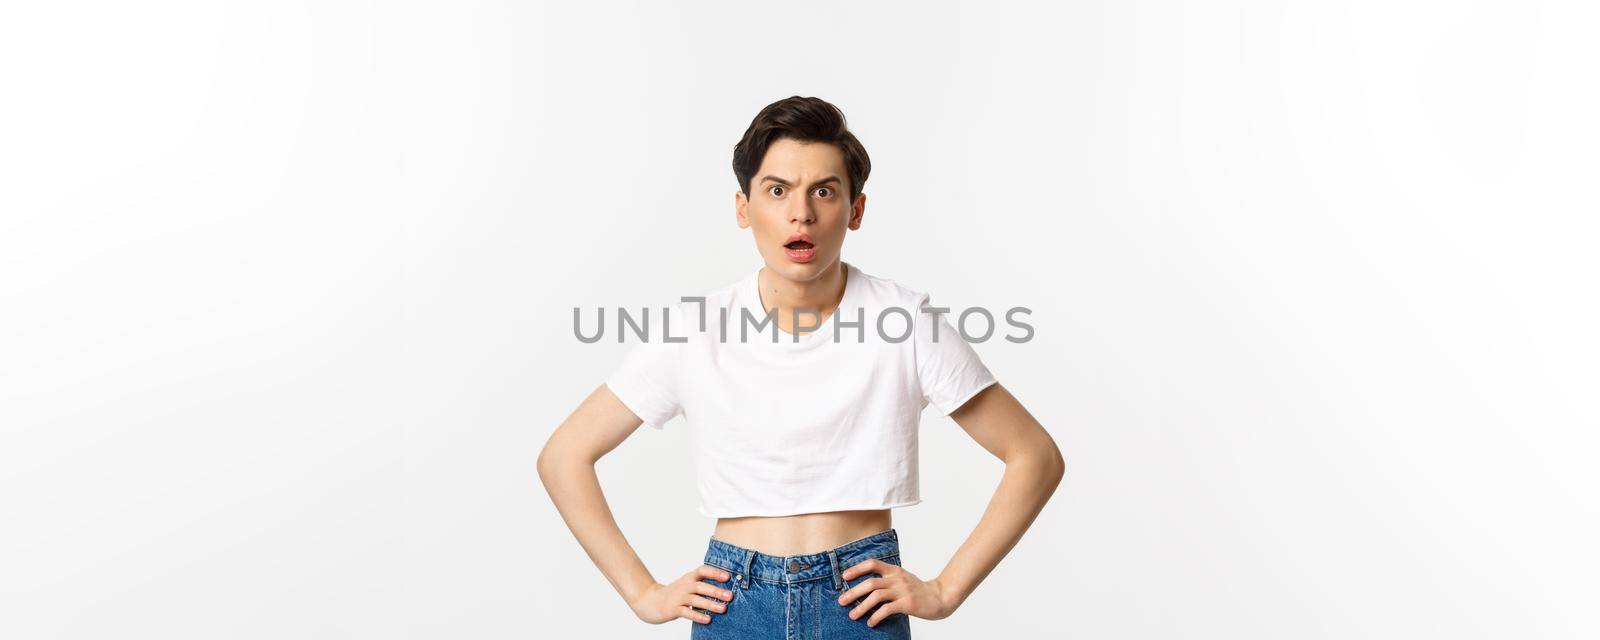 Shocked and confused gay man staring at camera startled, wearing crop top, holding hands on waist, standing over white background.